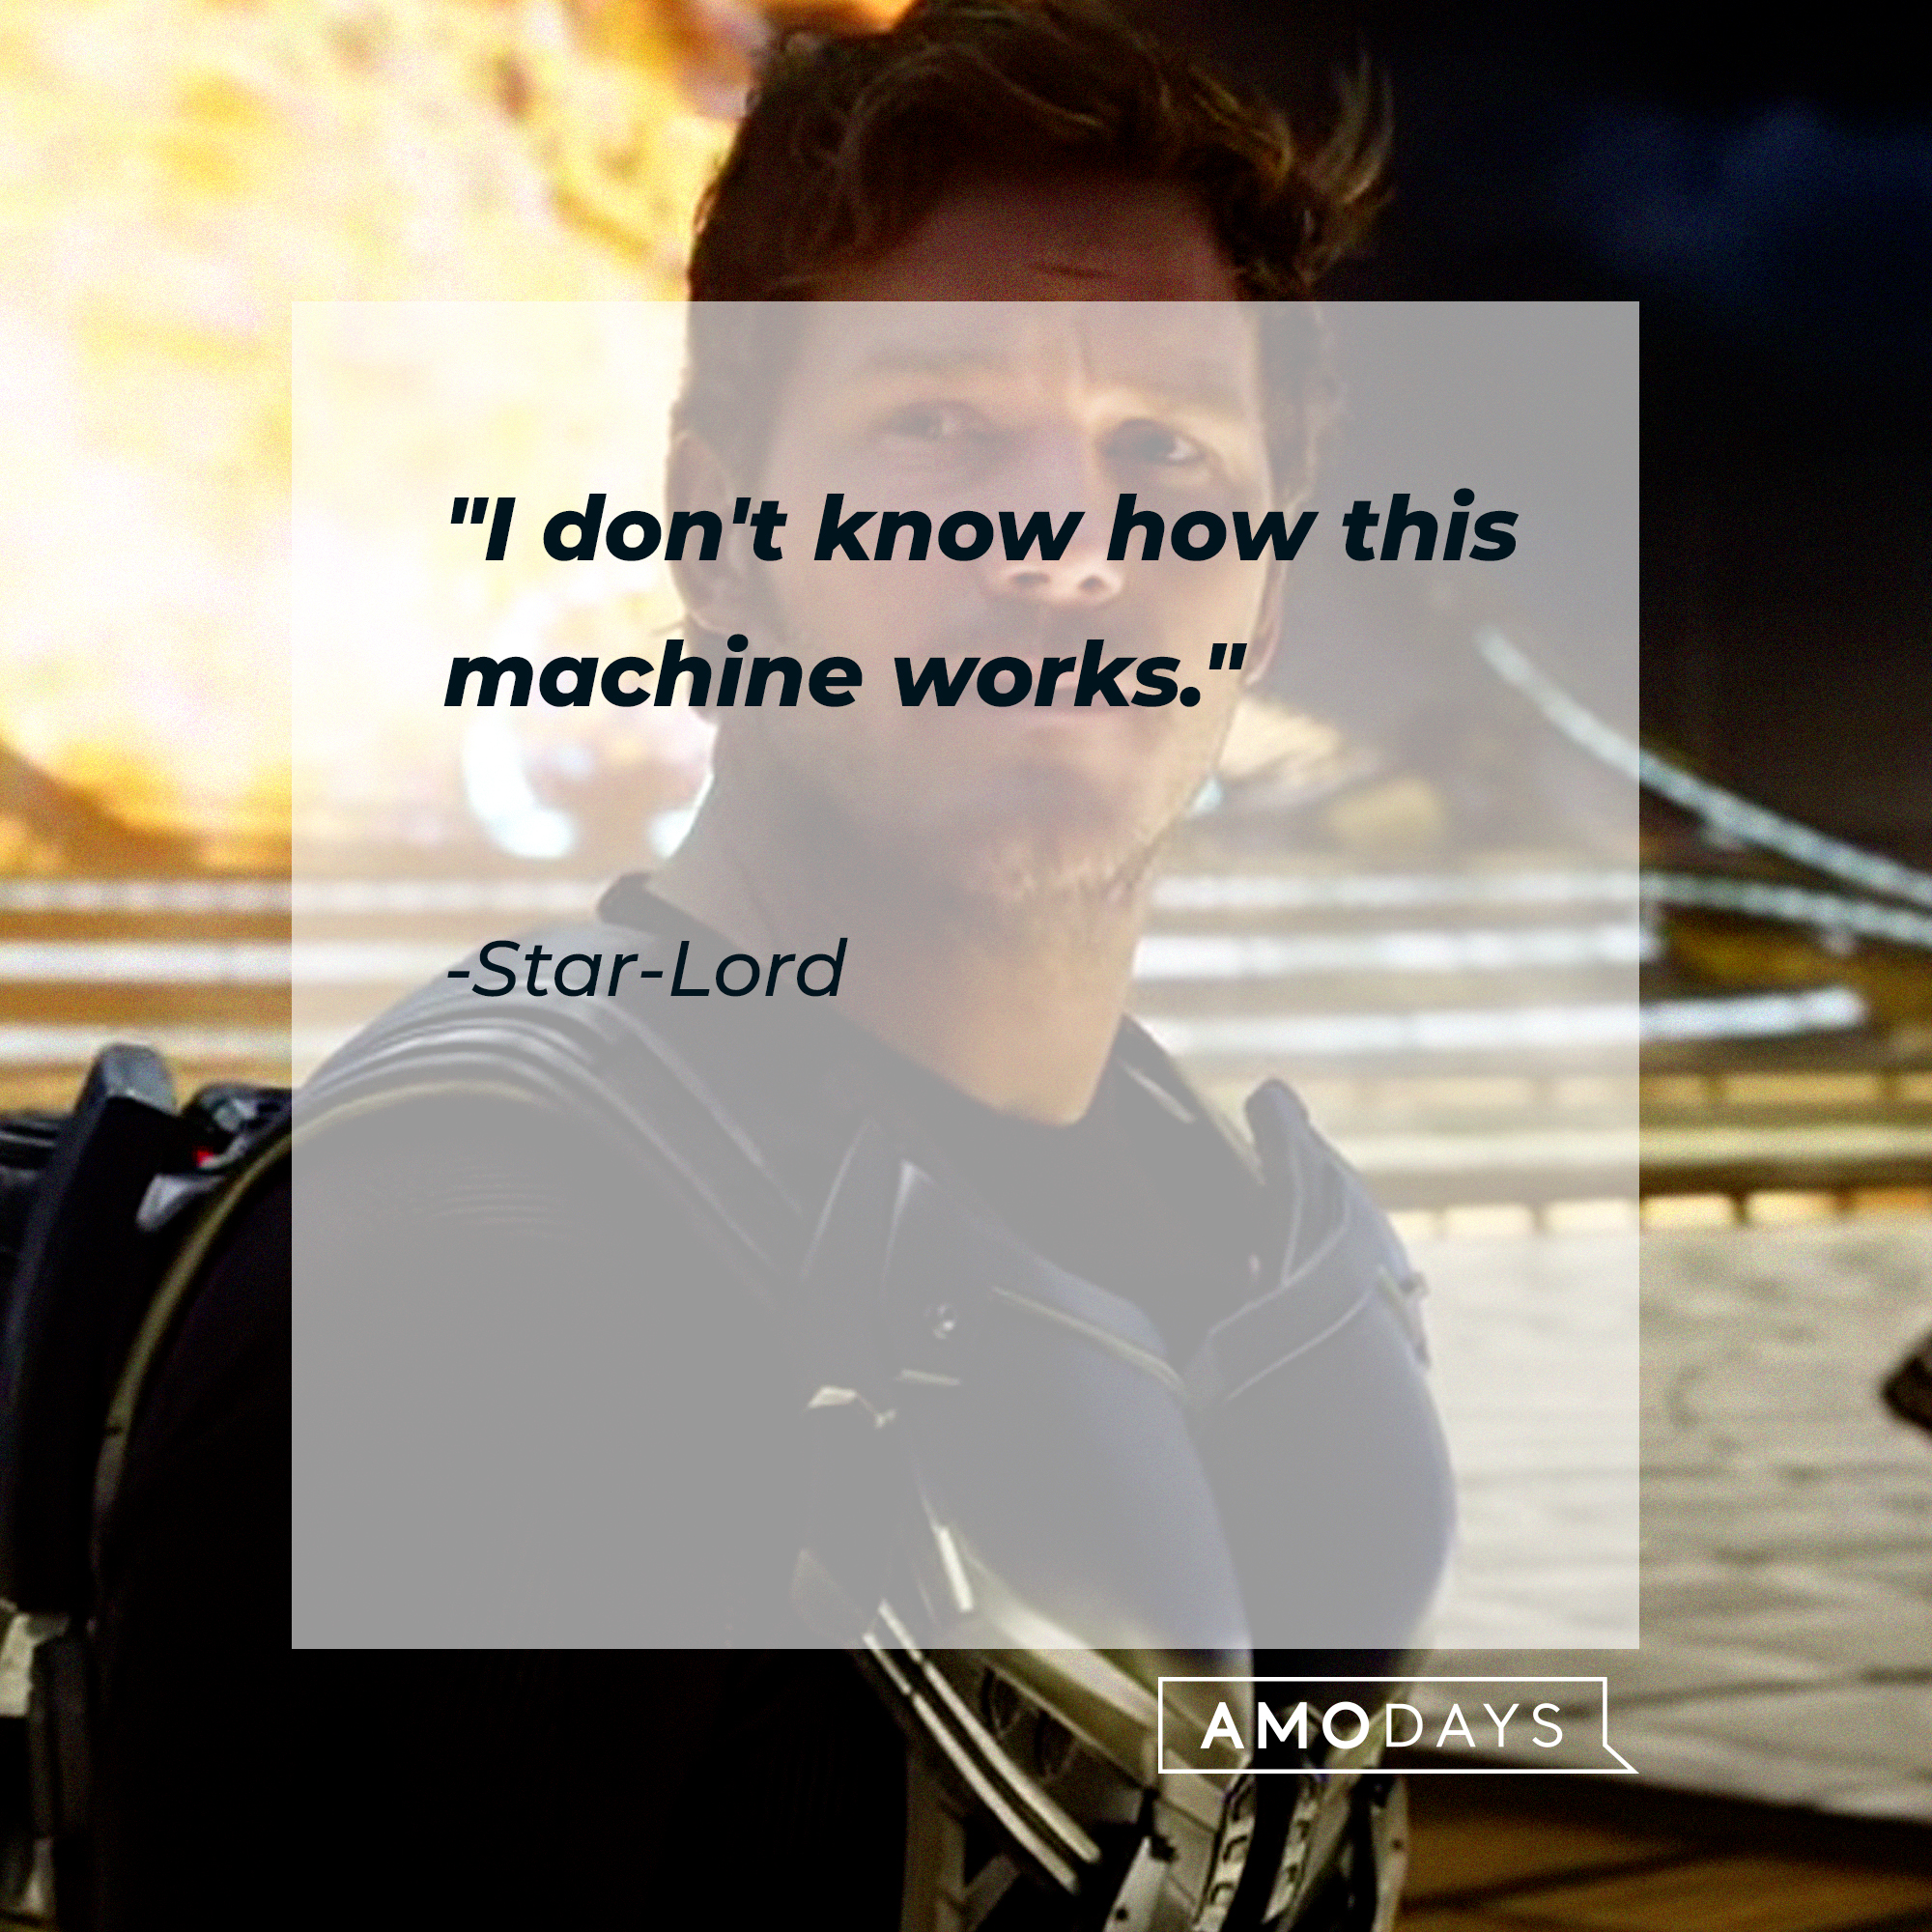 A photo of Star-Lord with his quote, "I don't know how this machine works." | Source: Facebook/guardiansofthegalaxy